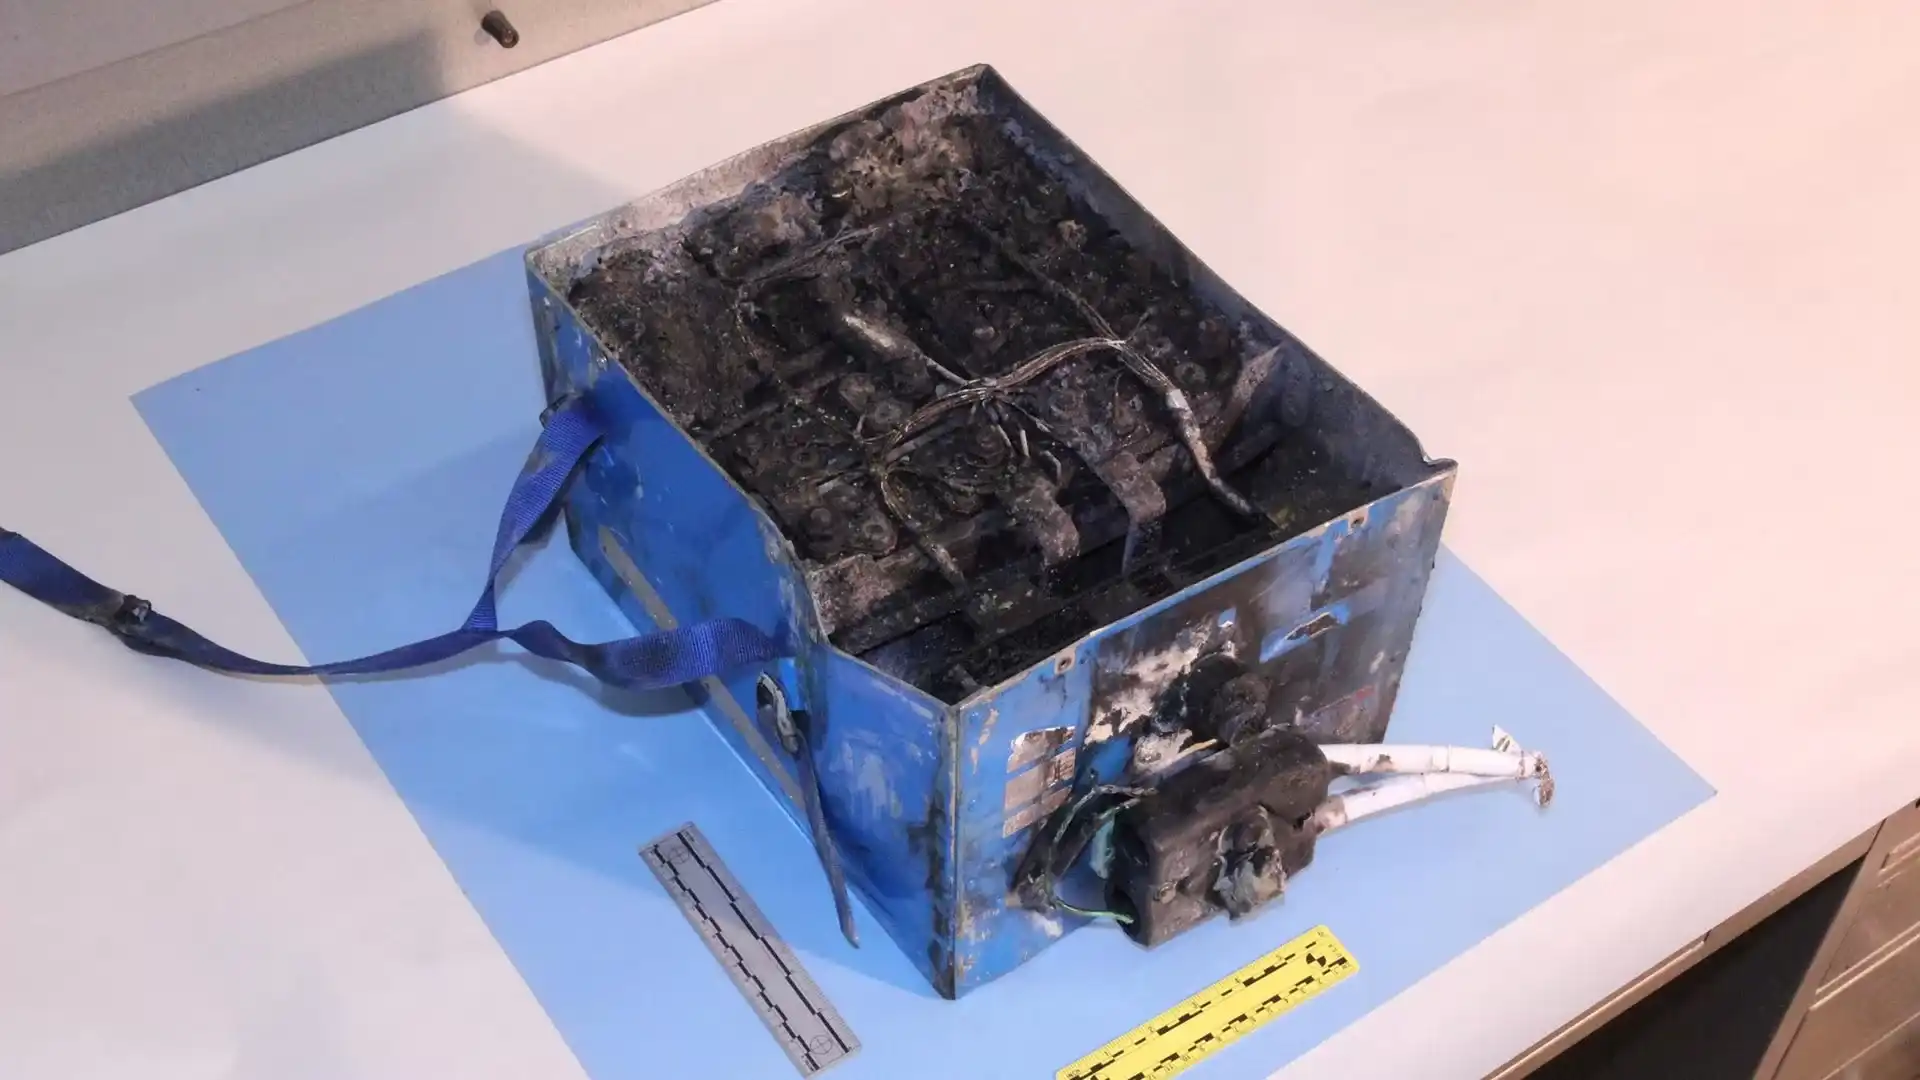 Lithium iron phosphate battery catches fire due to short circuit